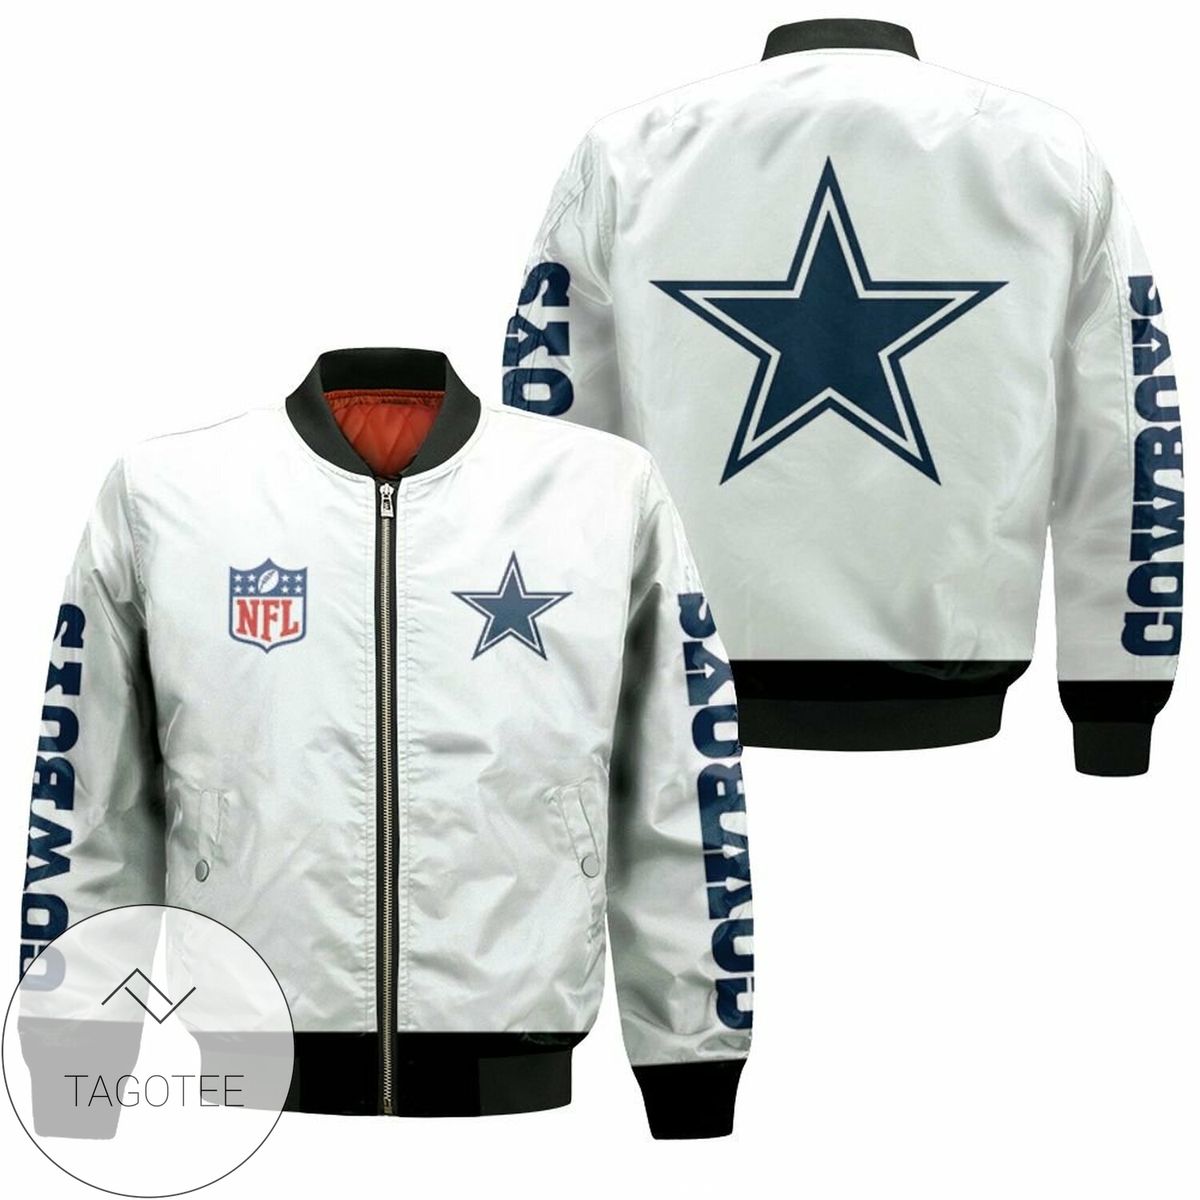 Dallas Cowboys Nfl Fan For Cowboys Lovers 3D Jacket 3D T Shirt Hoodie Sweater Jersey Bomber Jacket